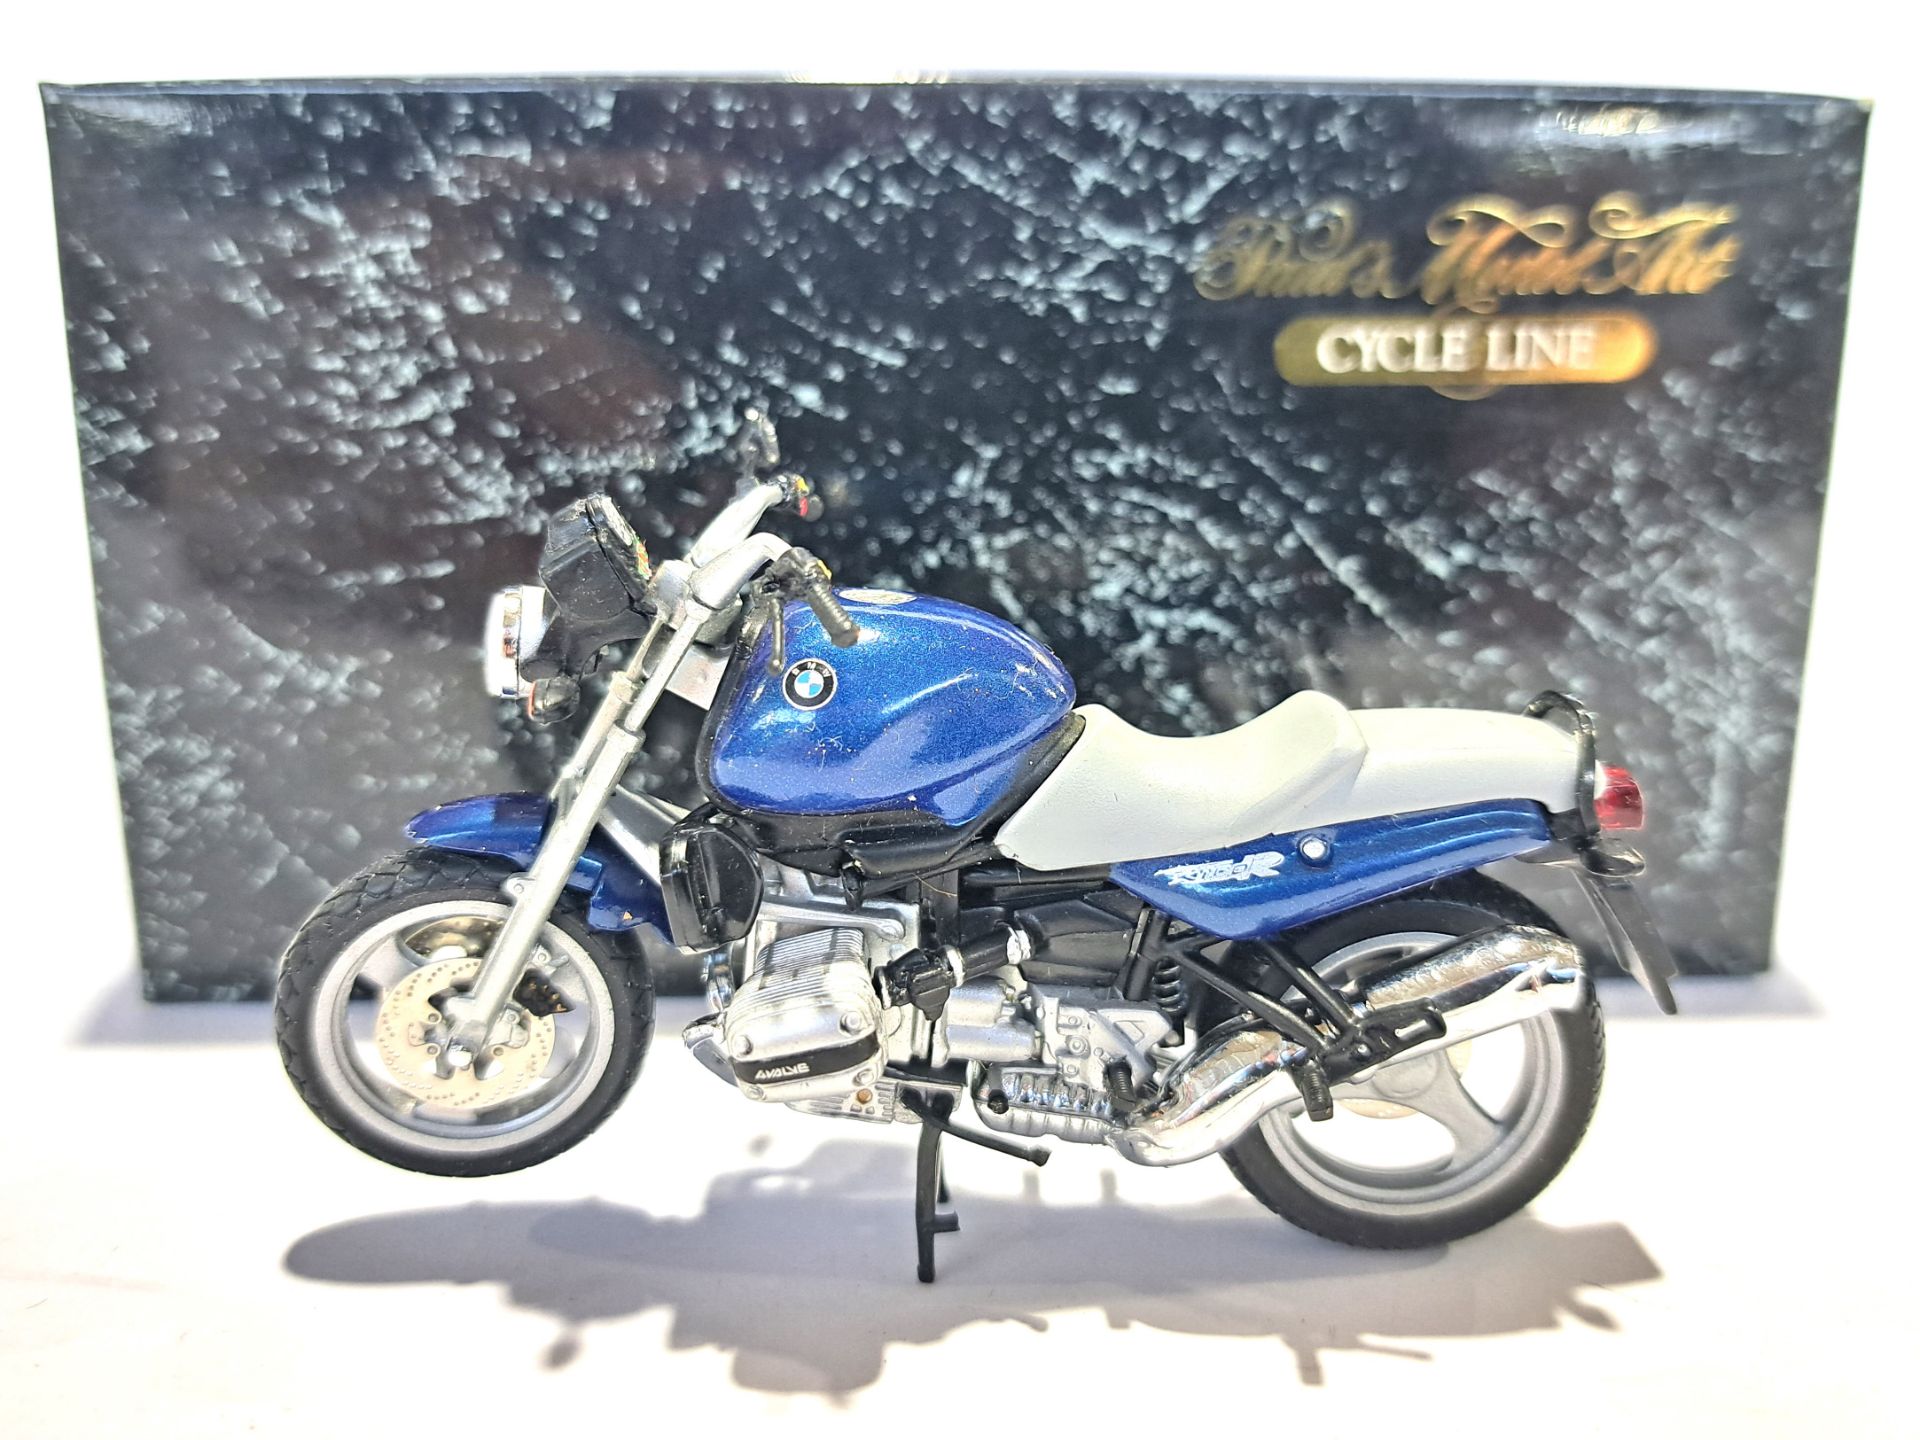 Paul's Model Art Cycle Line, a boxed group of 1:24 scale BMW motorcycles - Bild 5 aus 5